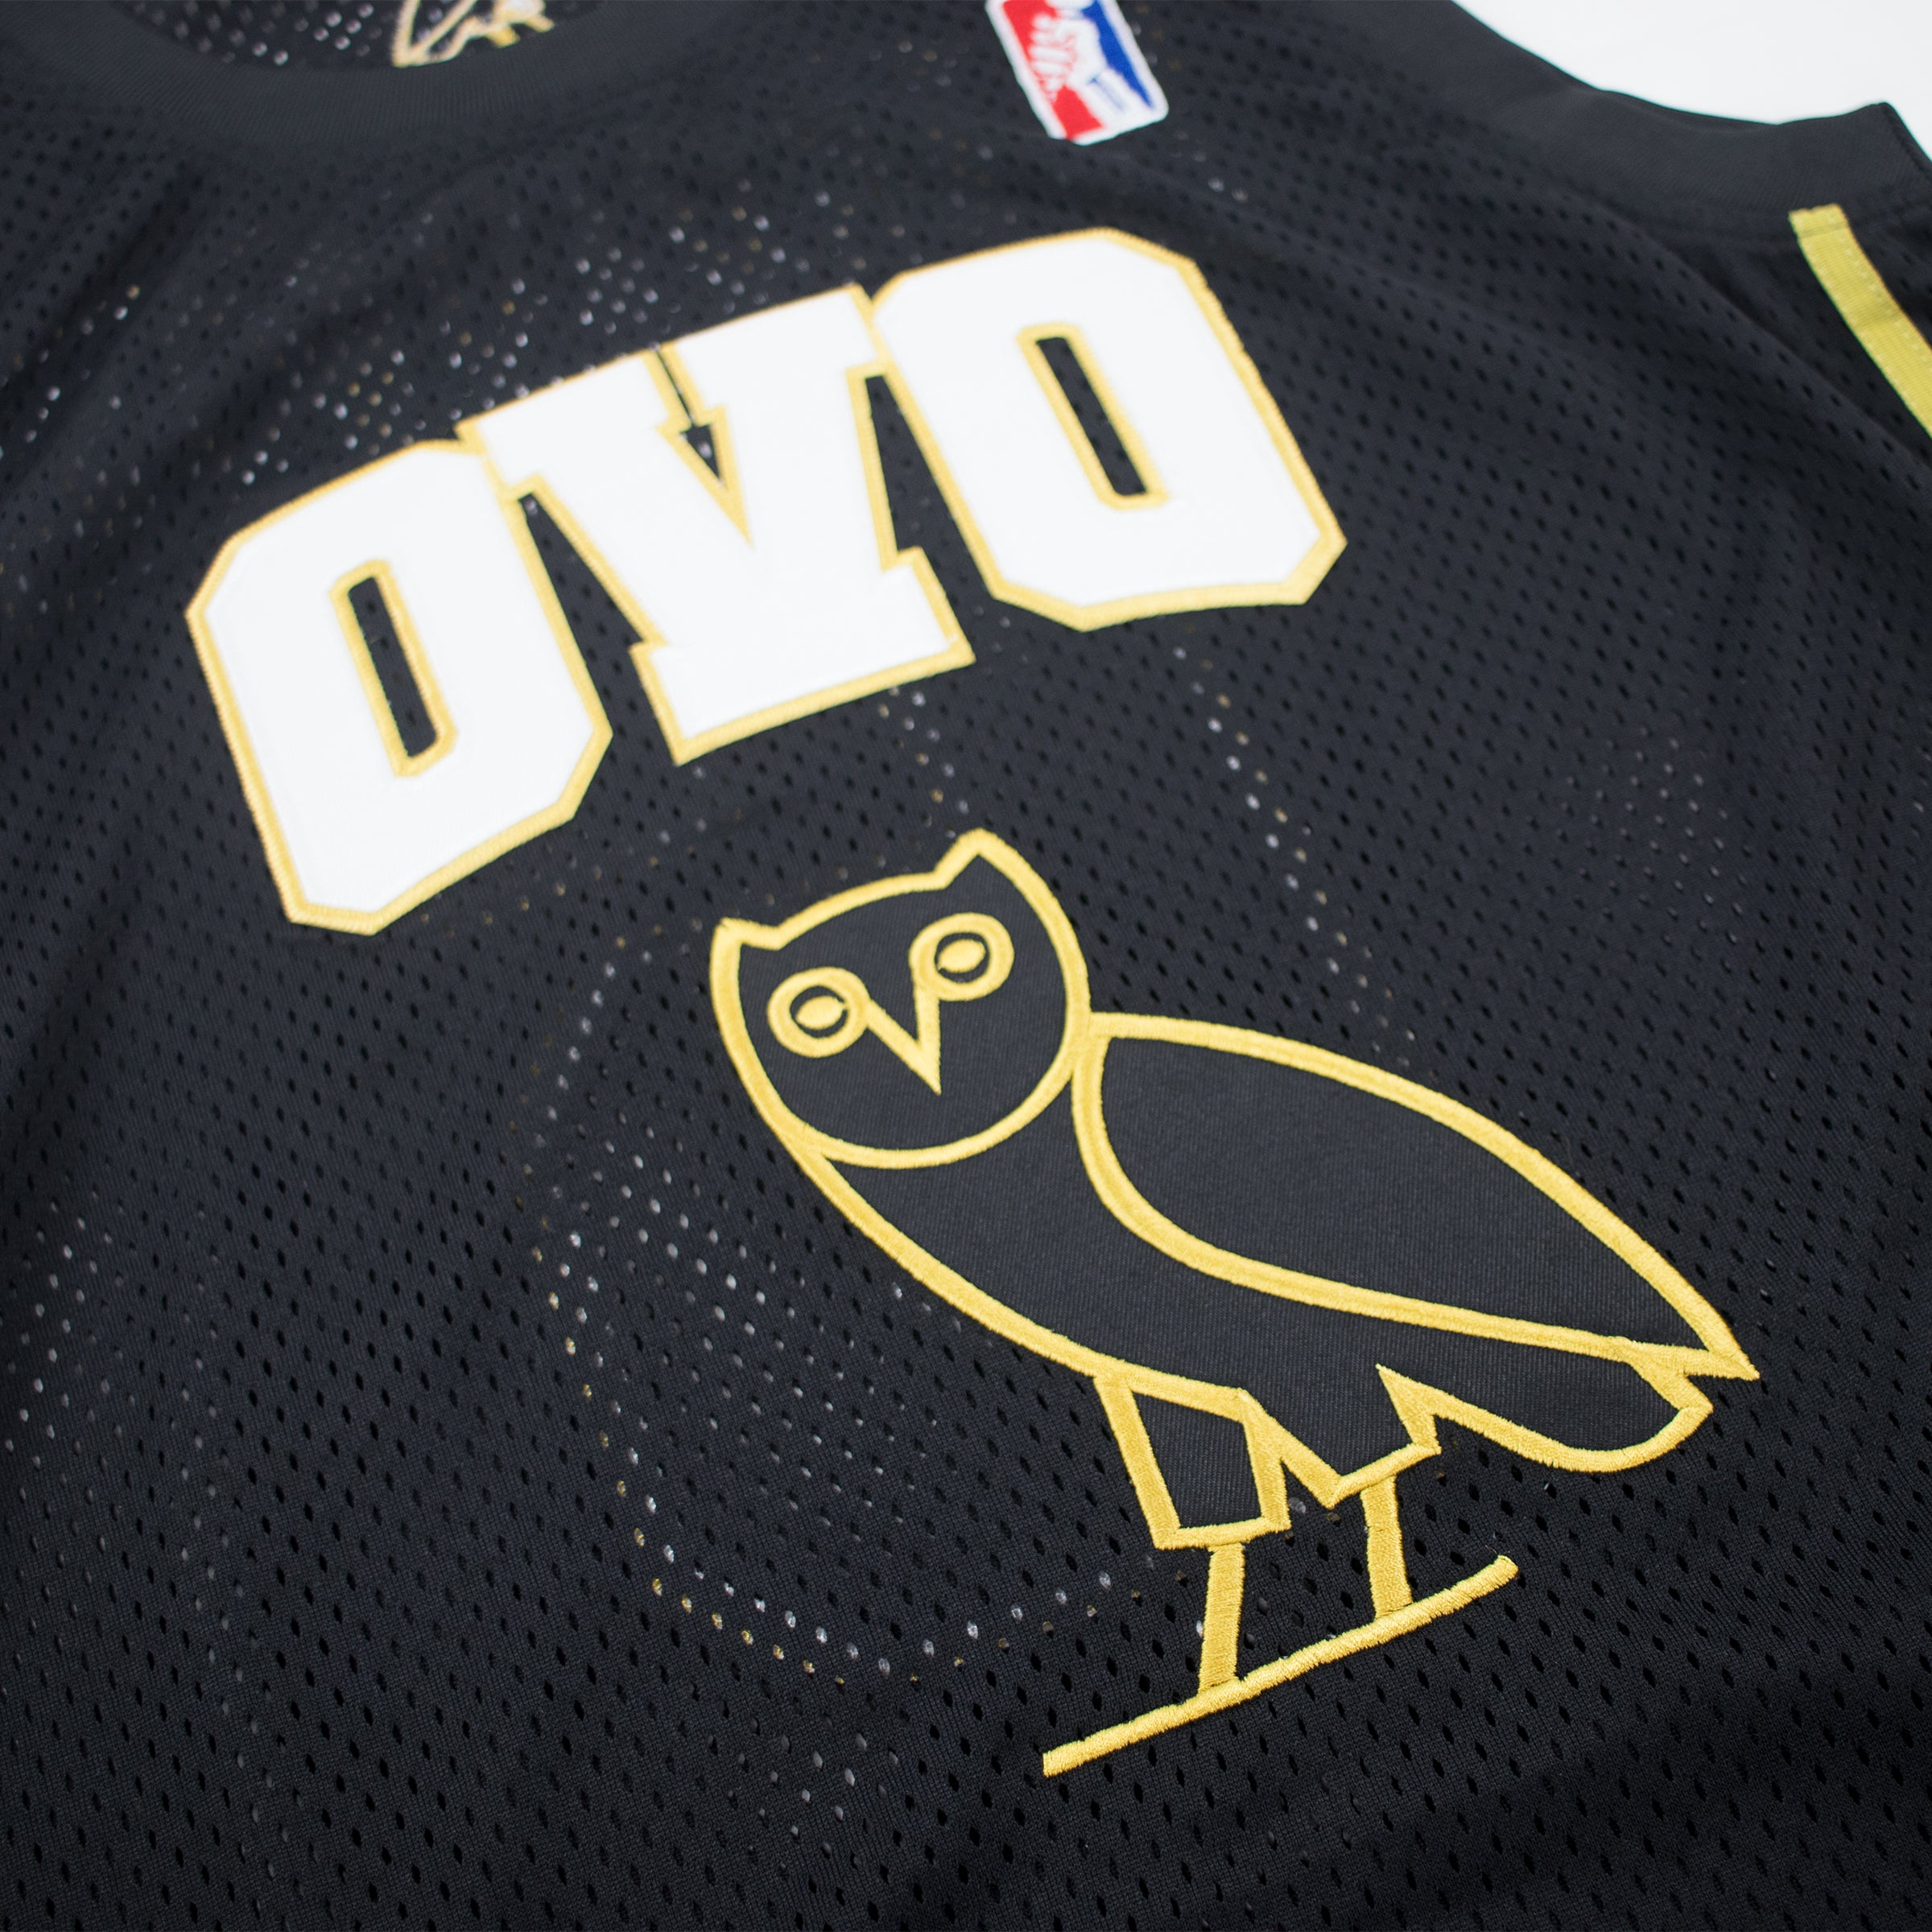 Your Team #6 Drake Ovo So Far Gone Men's Movie Basketball Jersey Stitched Black, Size: XL